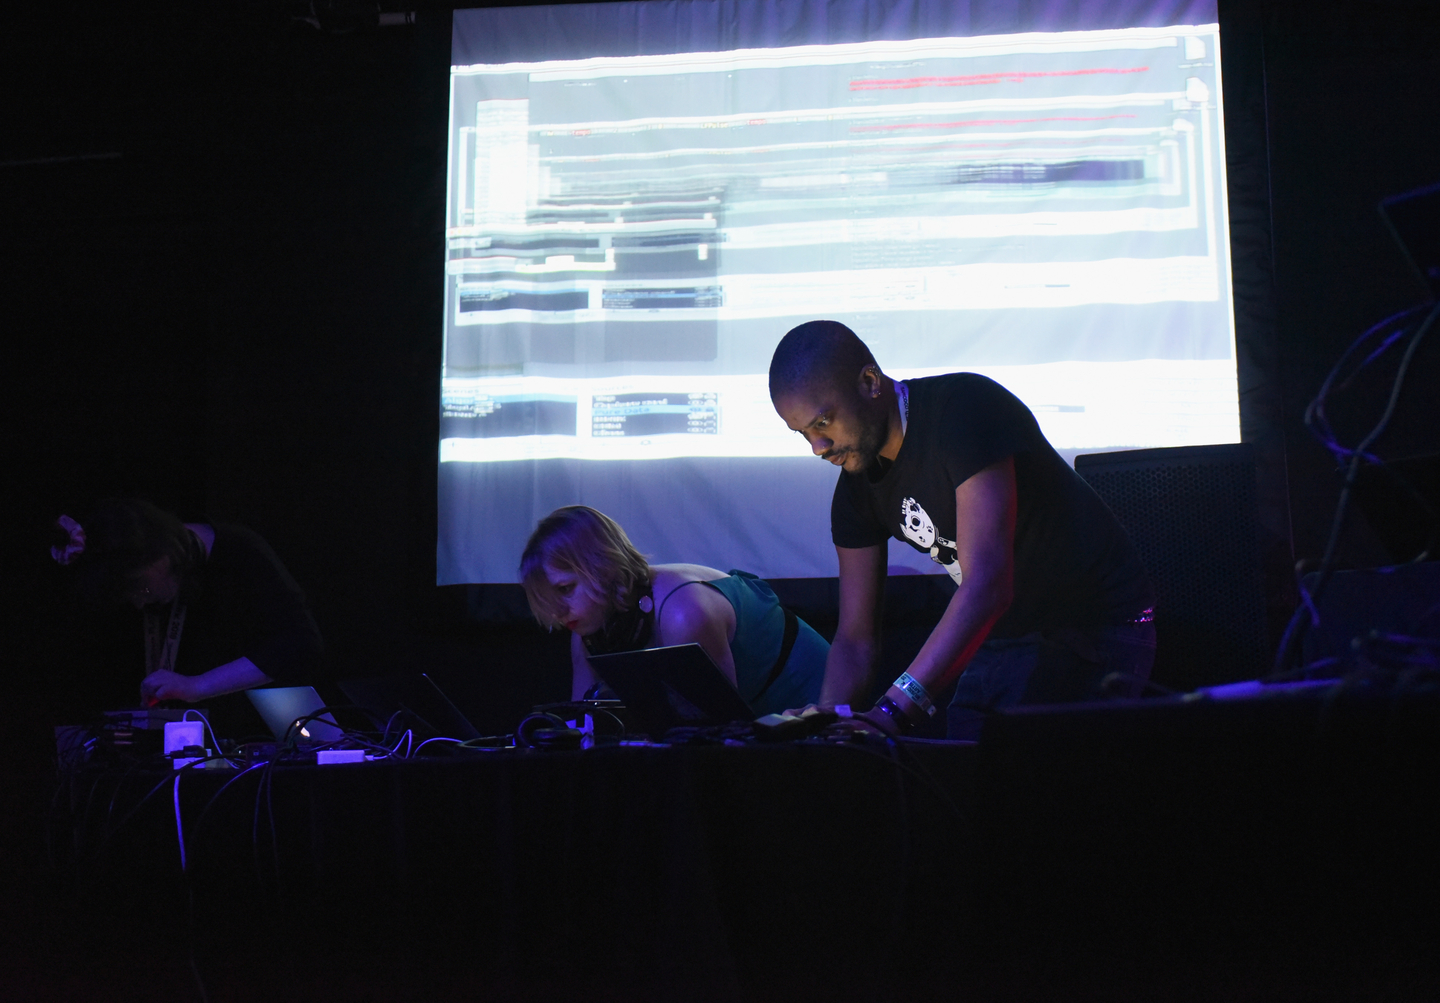 (L-R) Shelly Knotts and Joanne Armitage of AlgoBabez featuring hellocatfood perform onstage at the Lush presents Algorave: Live Coding Party at The Main II.